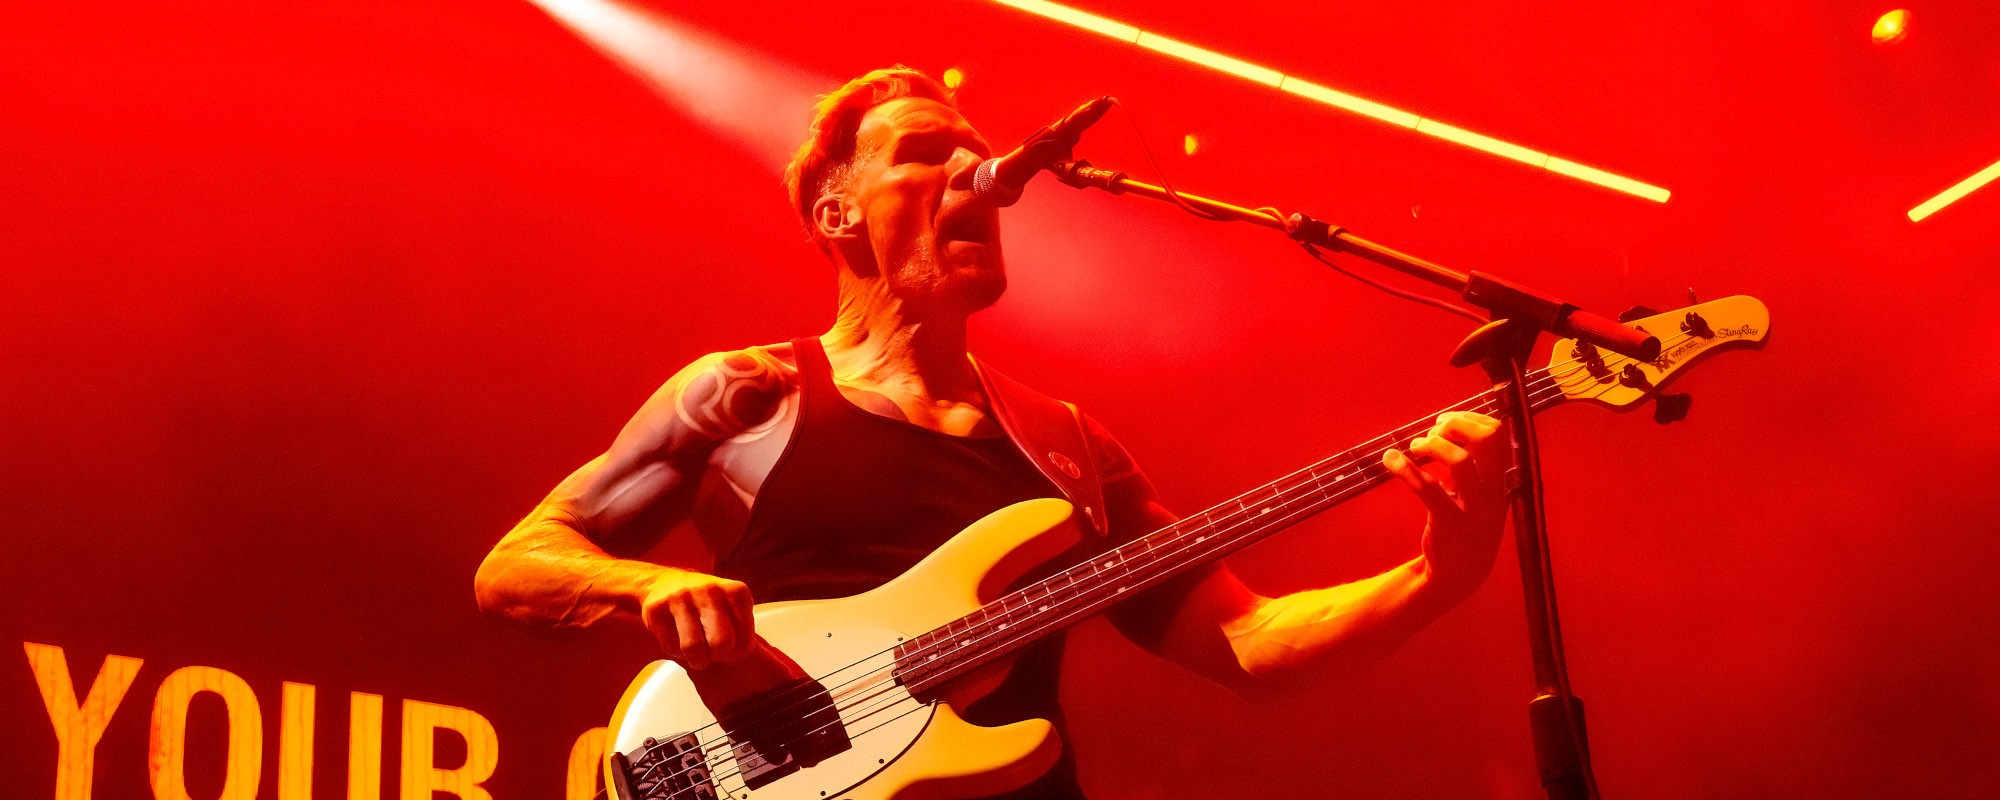 Rage Against the Machine’s Tim Commerford Announces New Band 7D7D, Debuts Song “Capitalism”